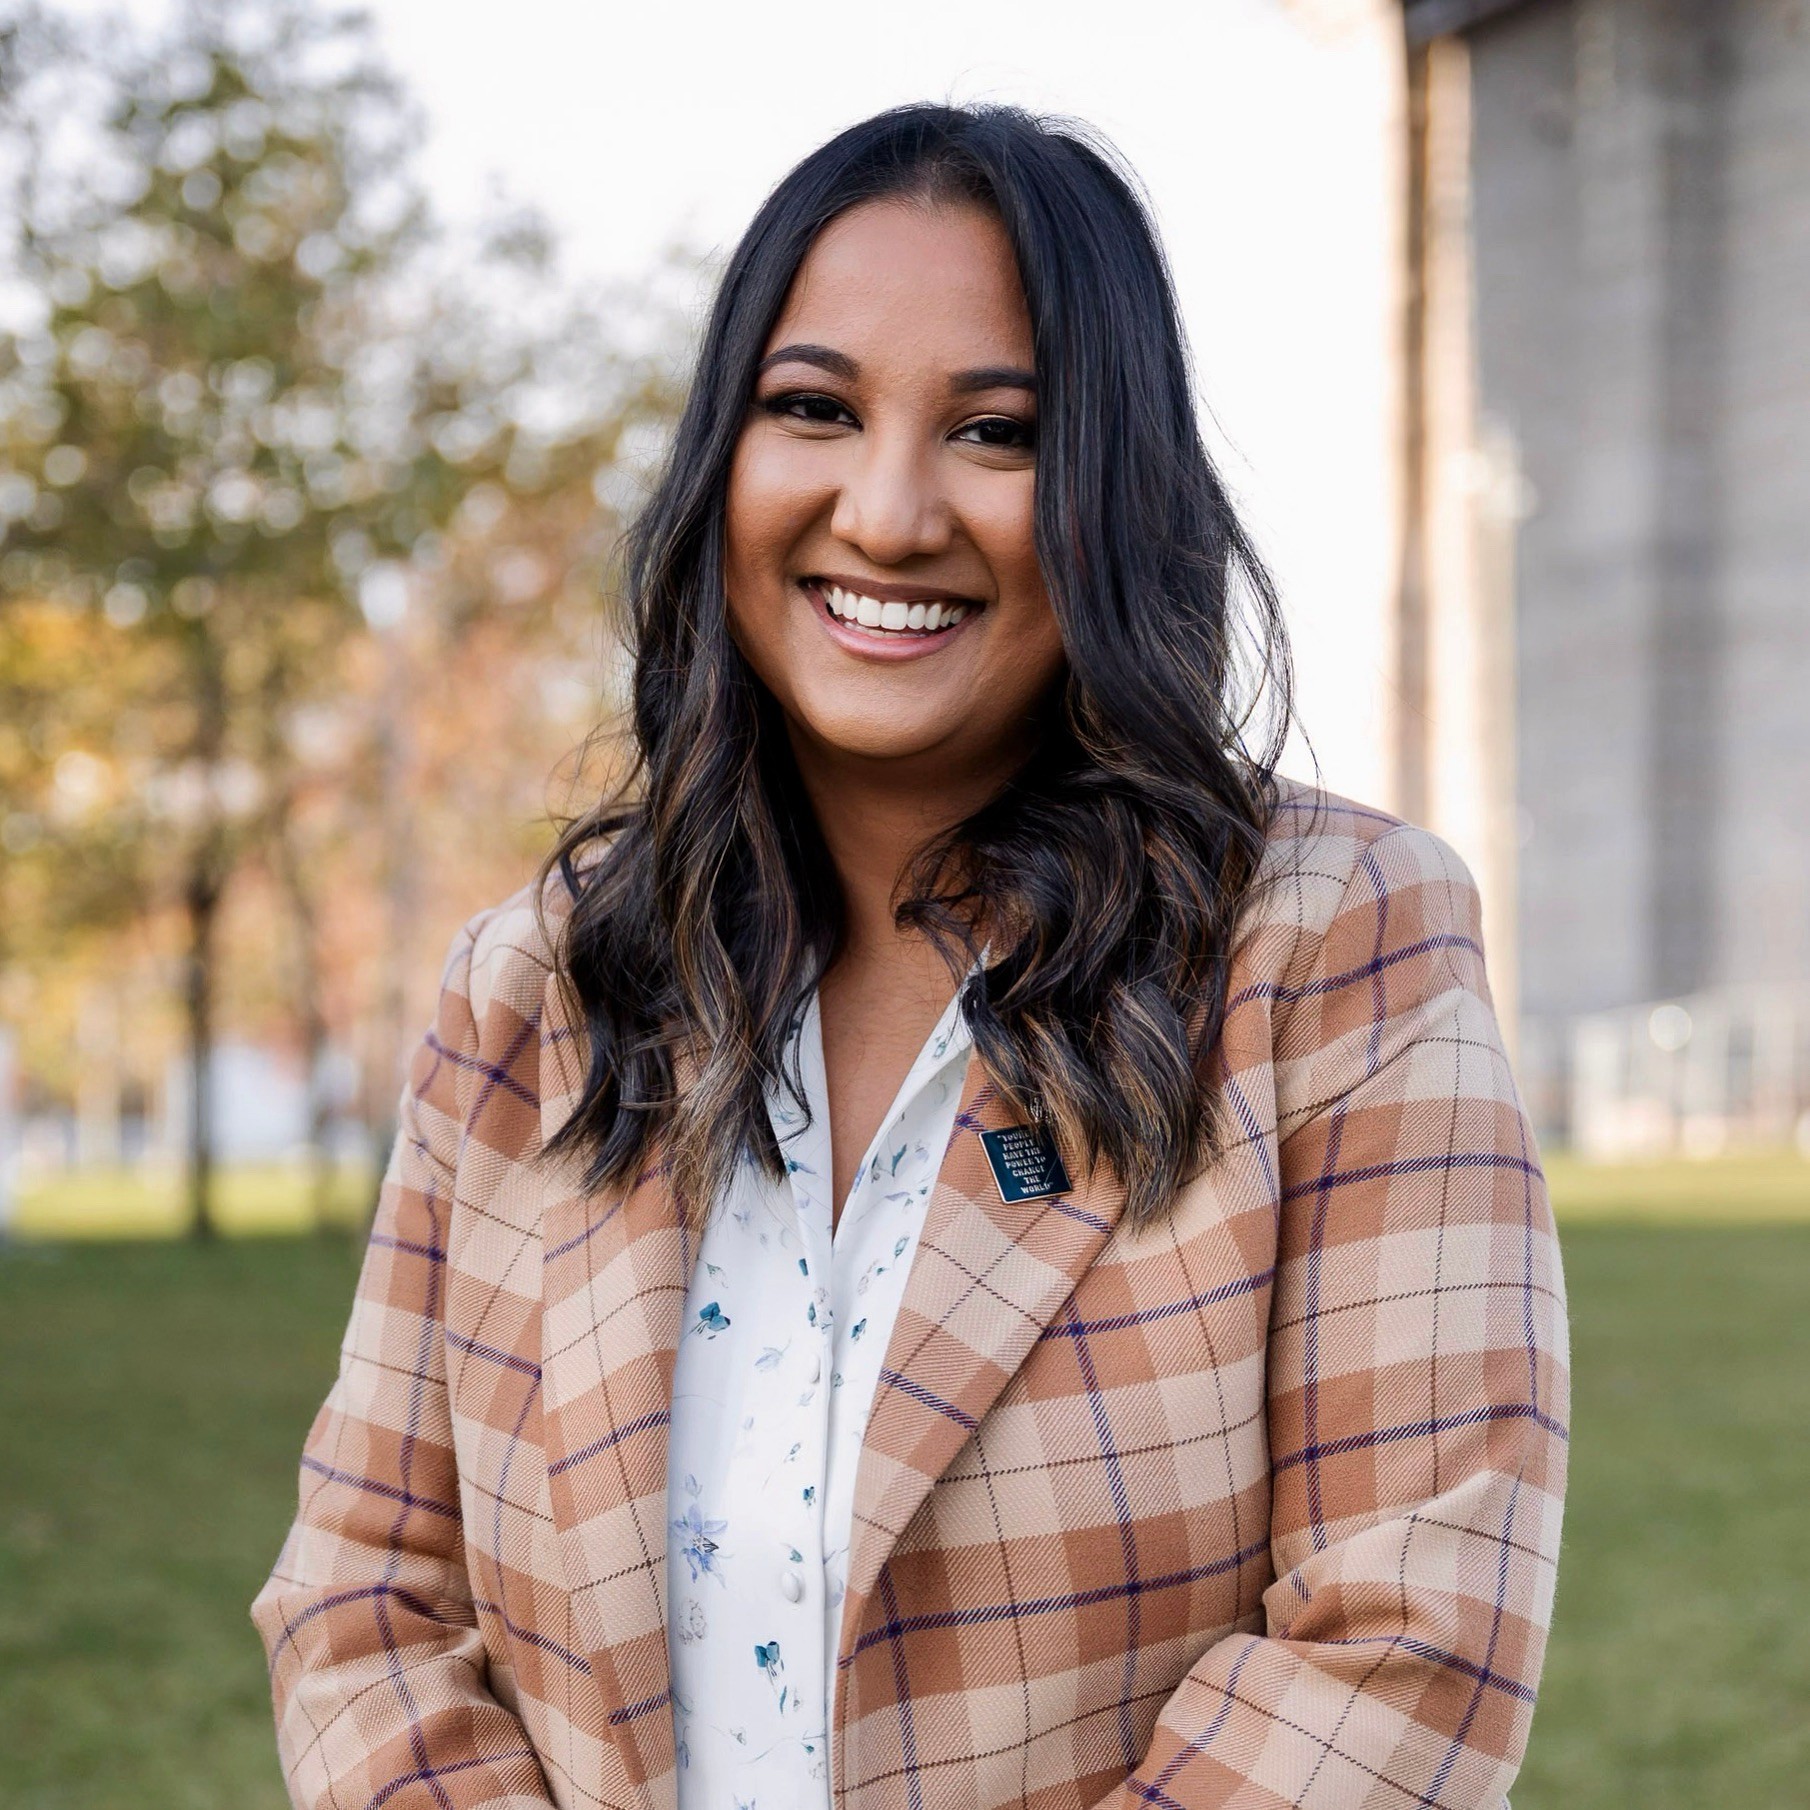 You Need to Meet: Rochelle Prasad, founder of the youth-focused